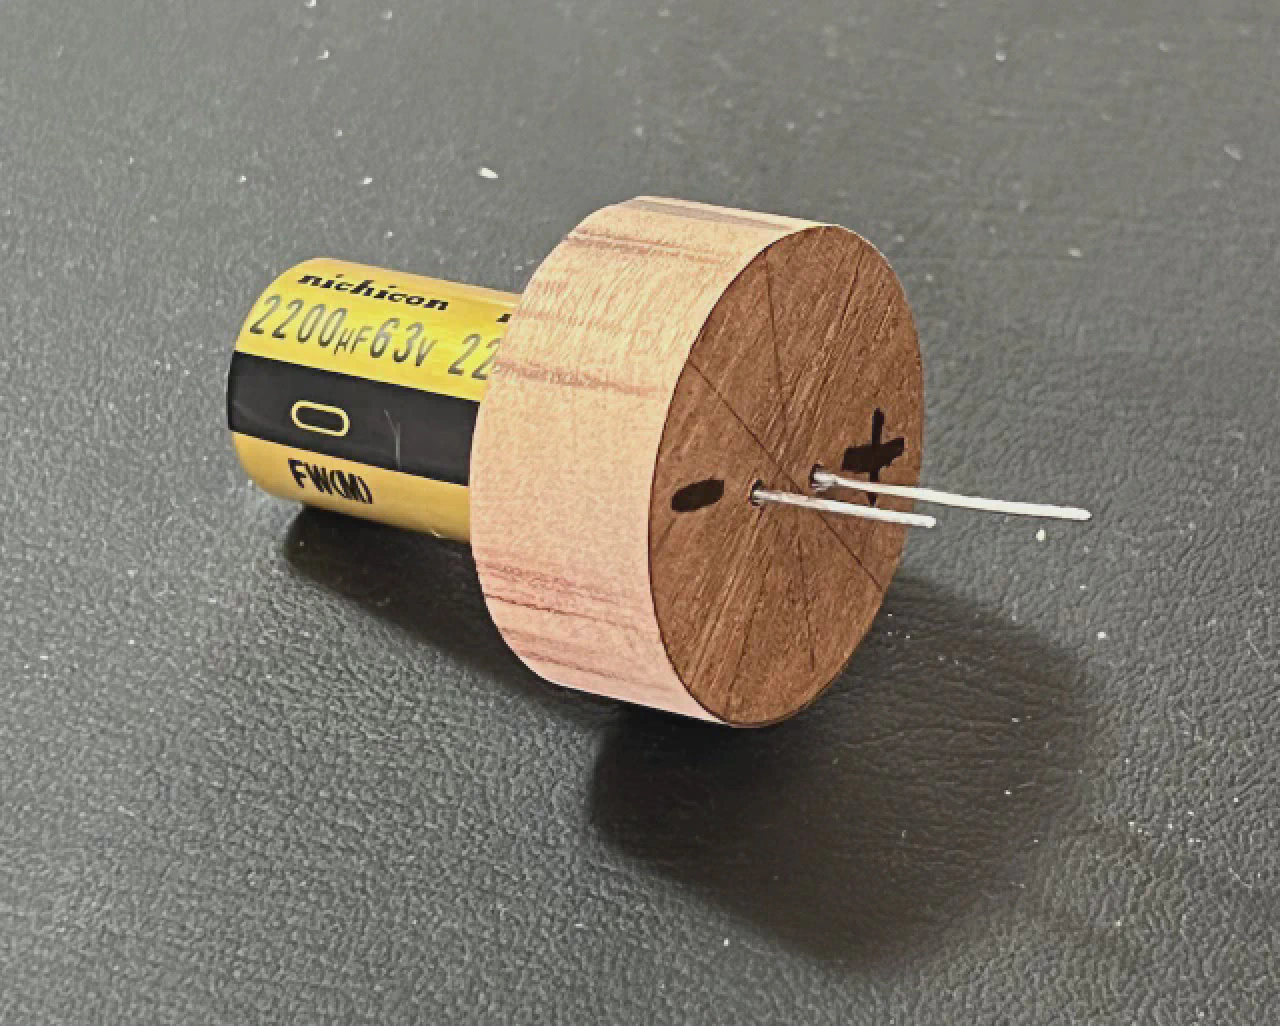 The replacement filter capacitor